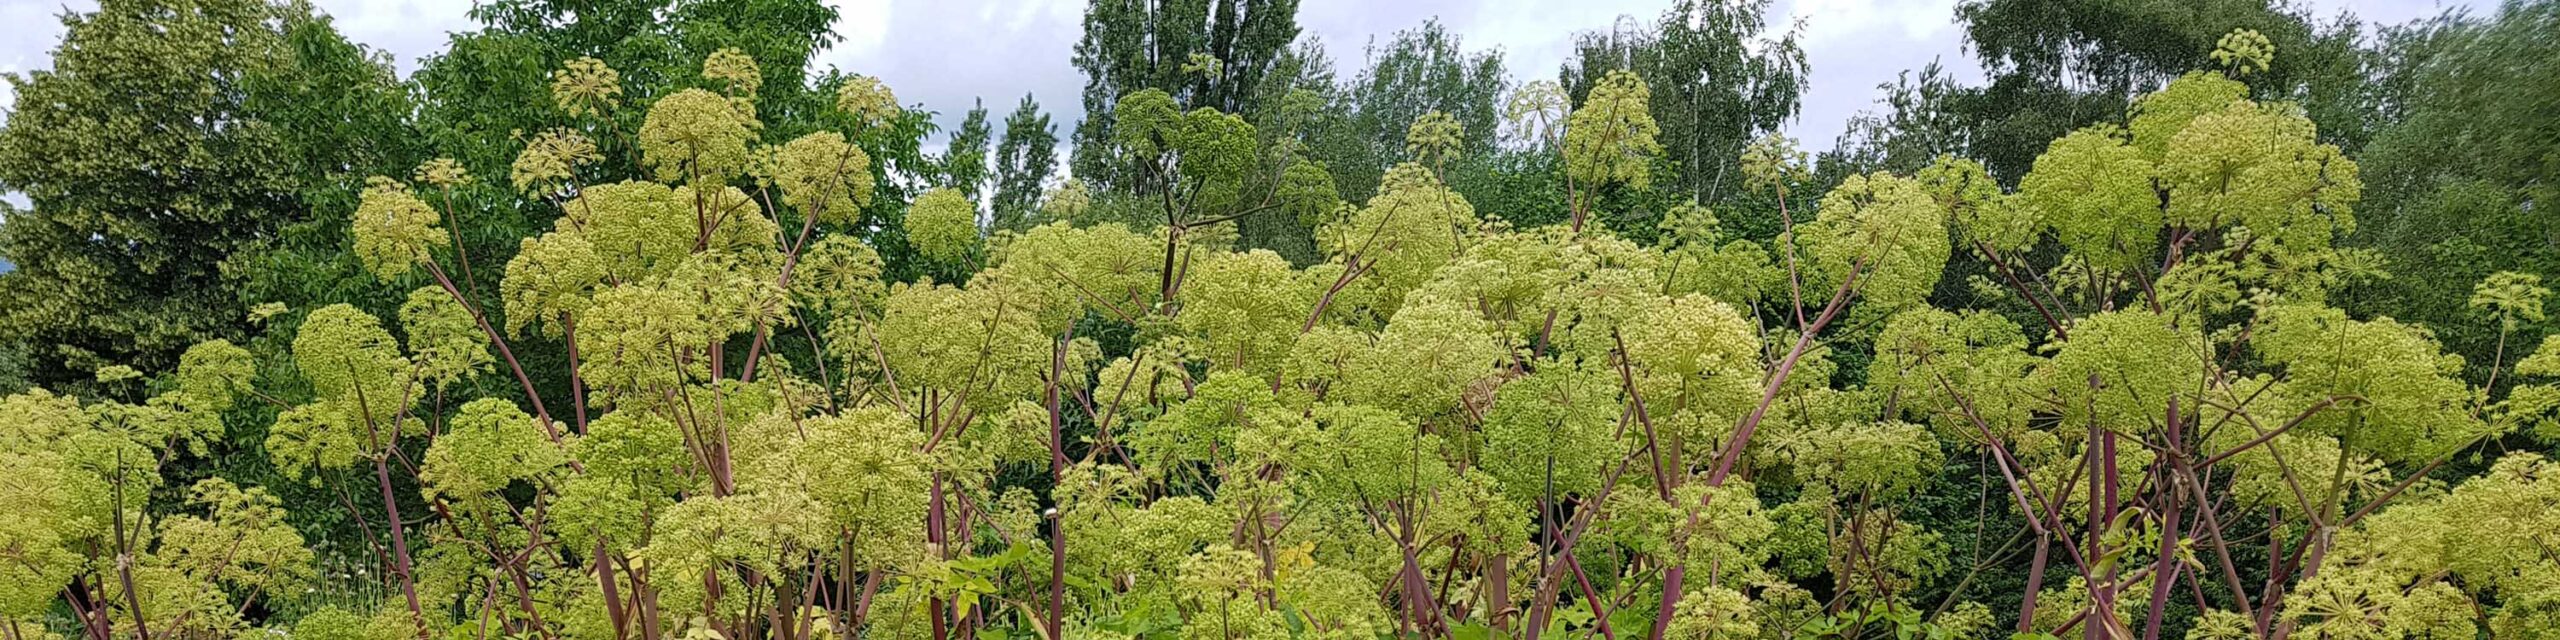 A large planting of angelica plants with green clusters of blooms.